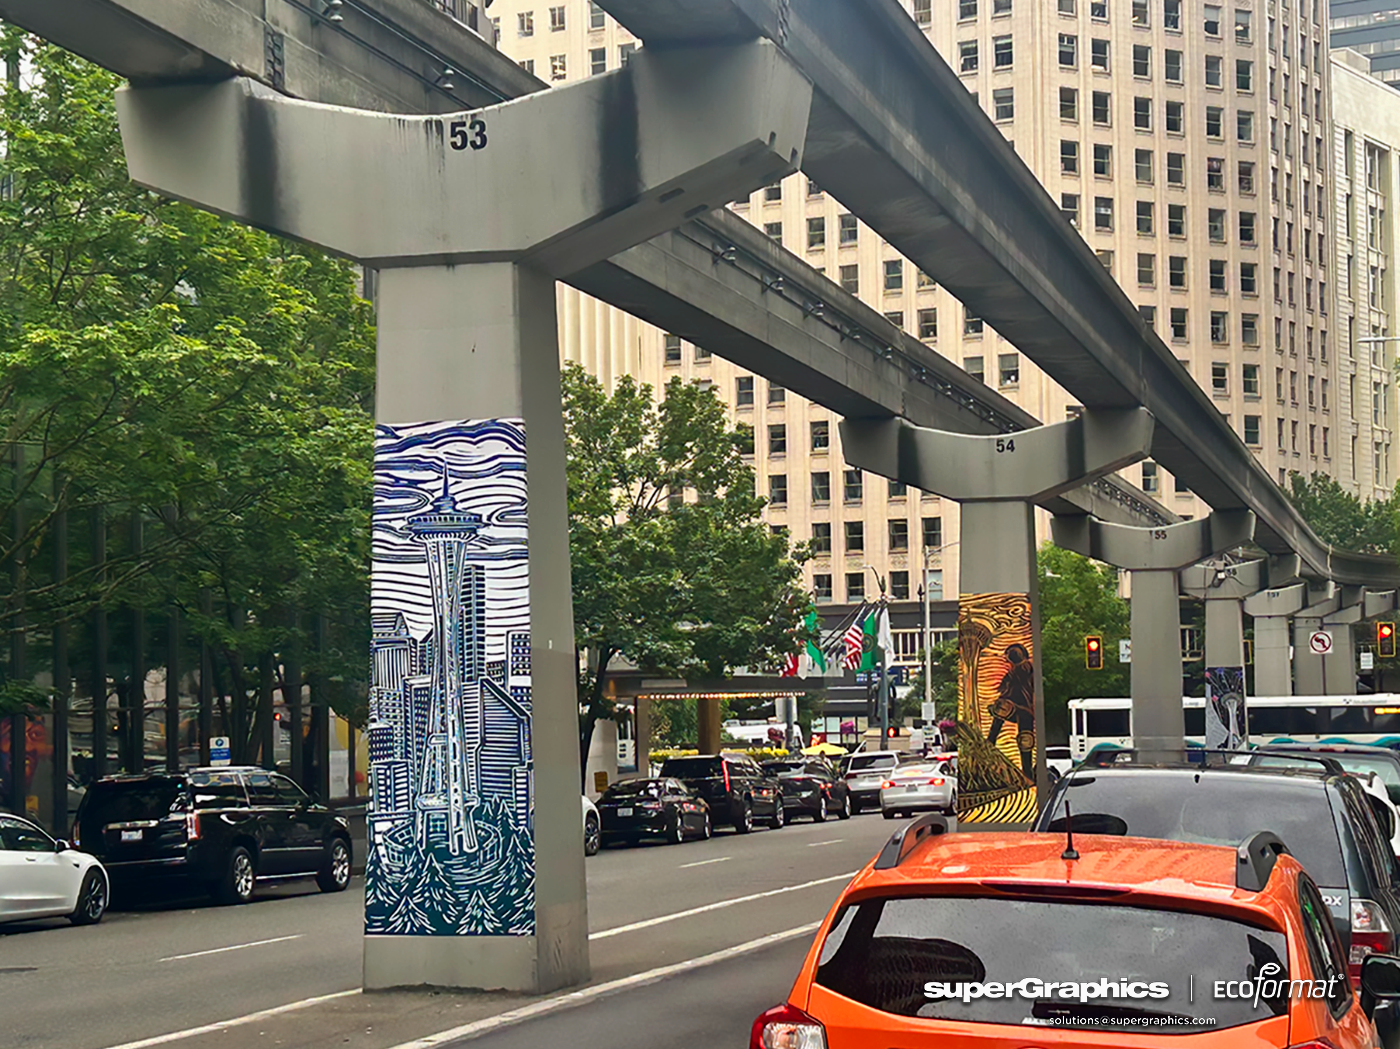 Seattle monorail columns wrapped in various vibrant graphics, including the Space Needle and cityscapes.